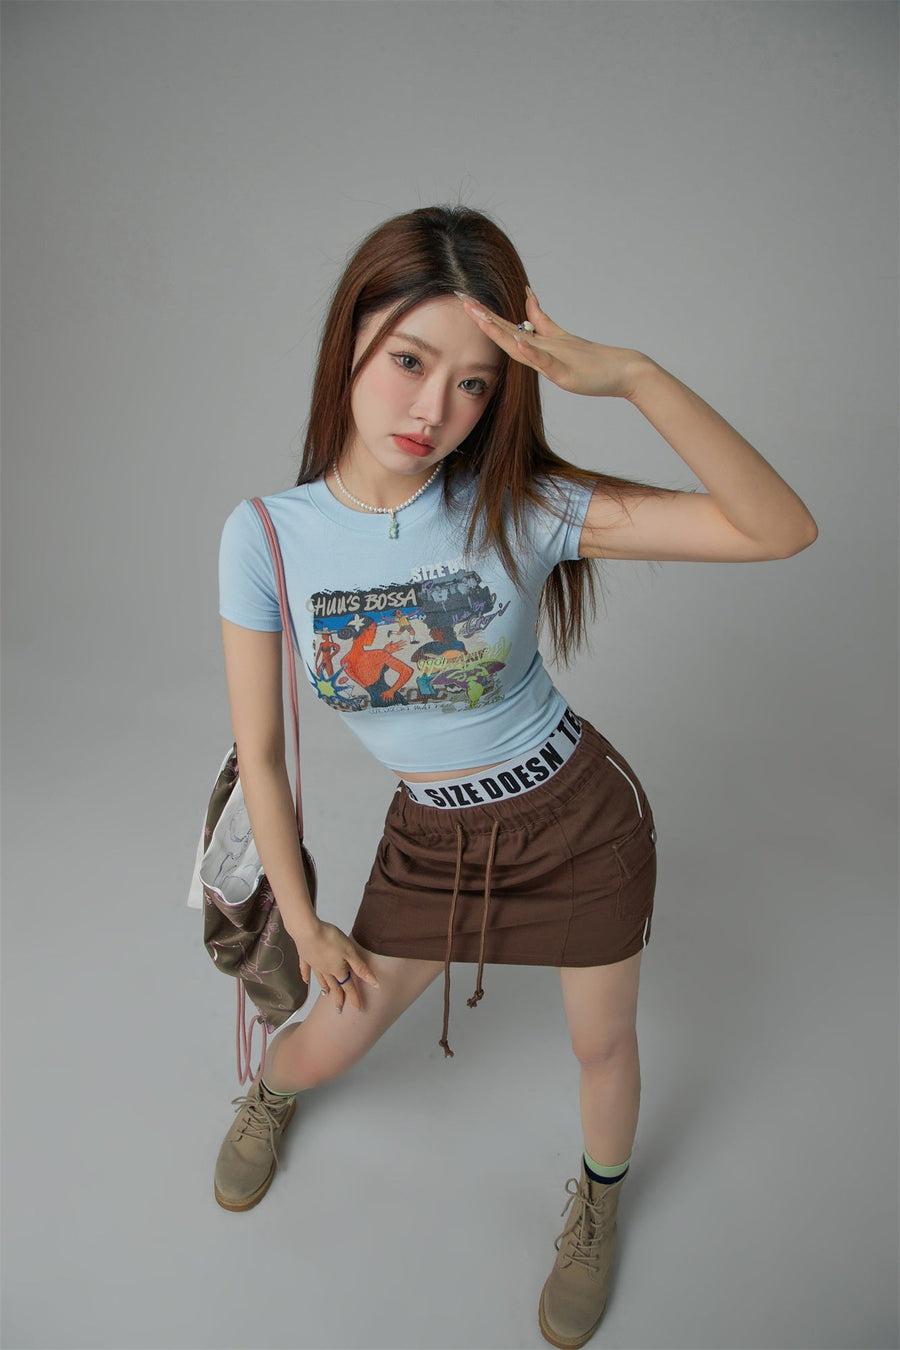 CHUU Size Doesnt Matter Beach Day Cropped T-Shirt